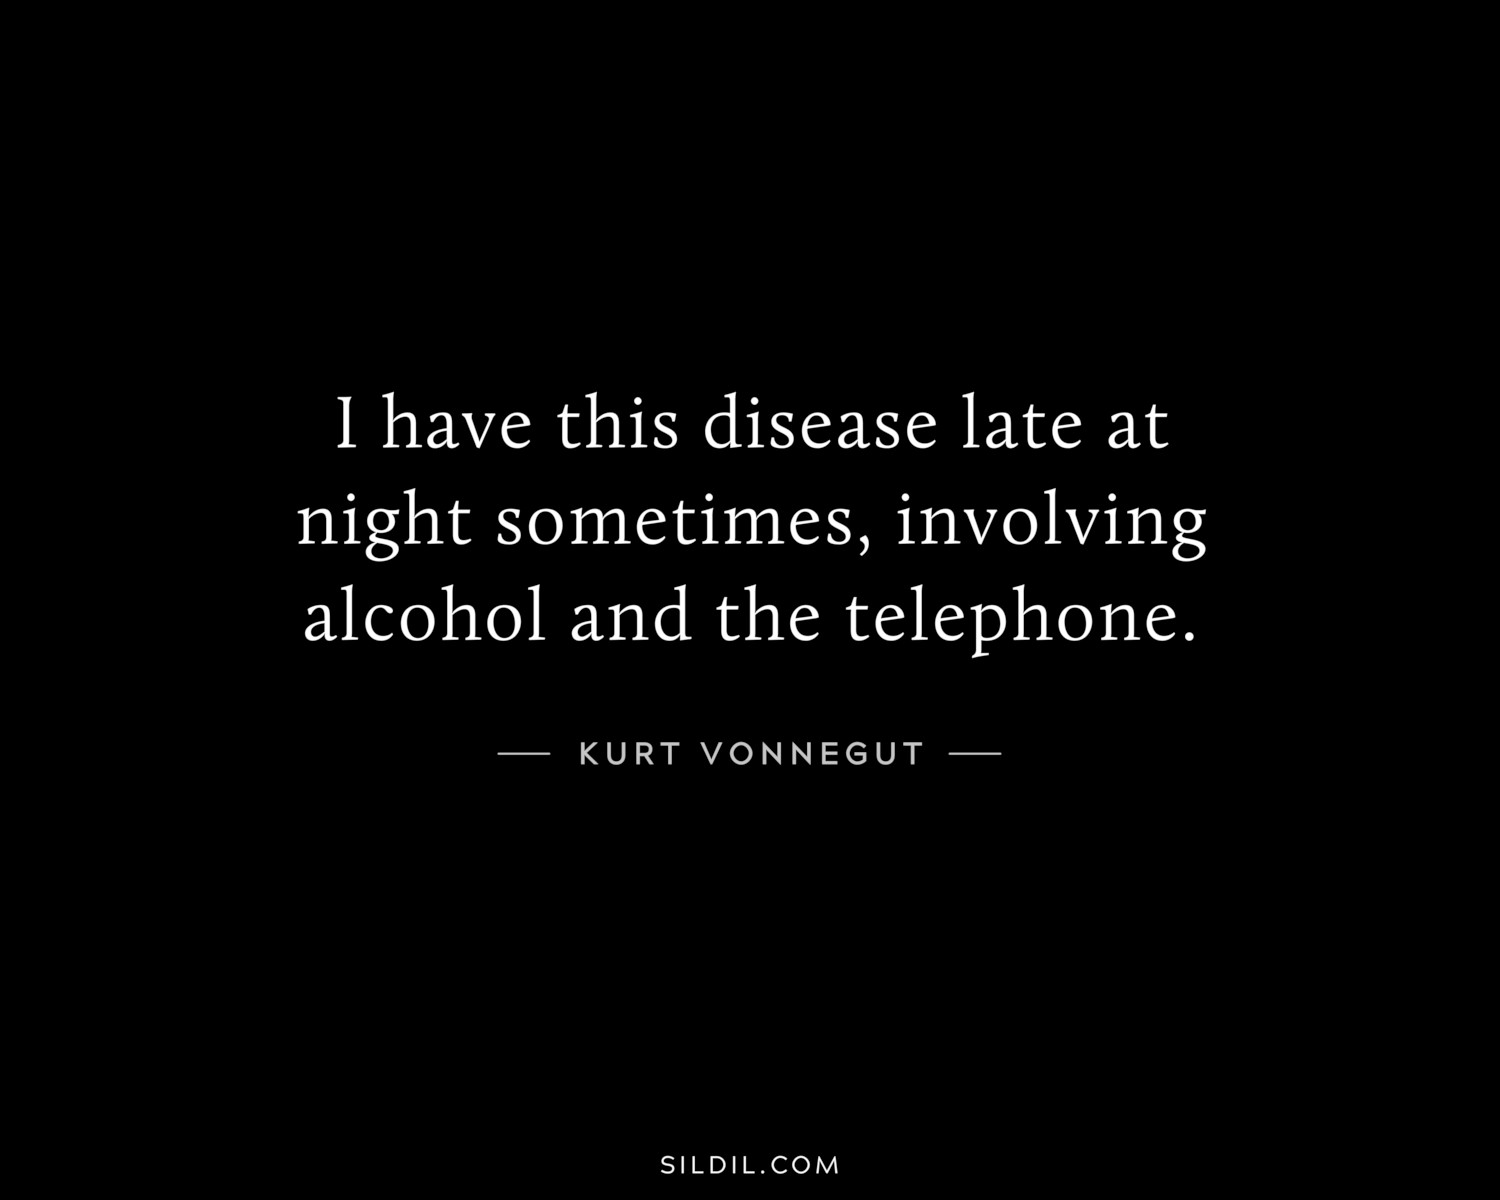 I have this disease late at night sometimes, involving alcohol and the telephone.